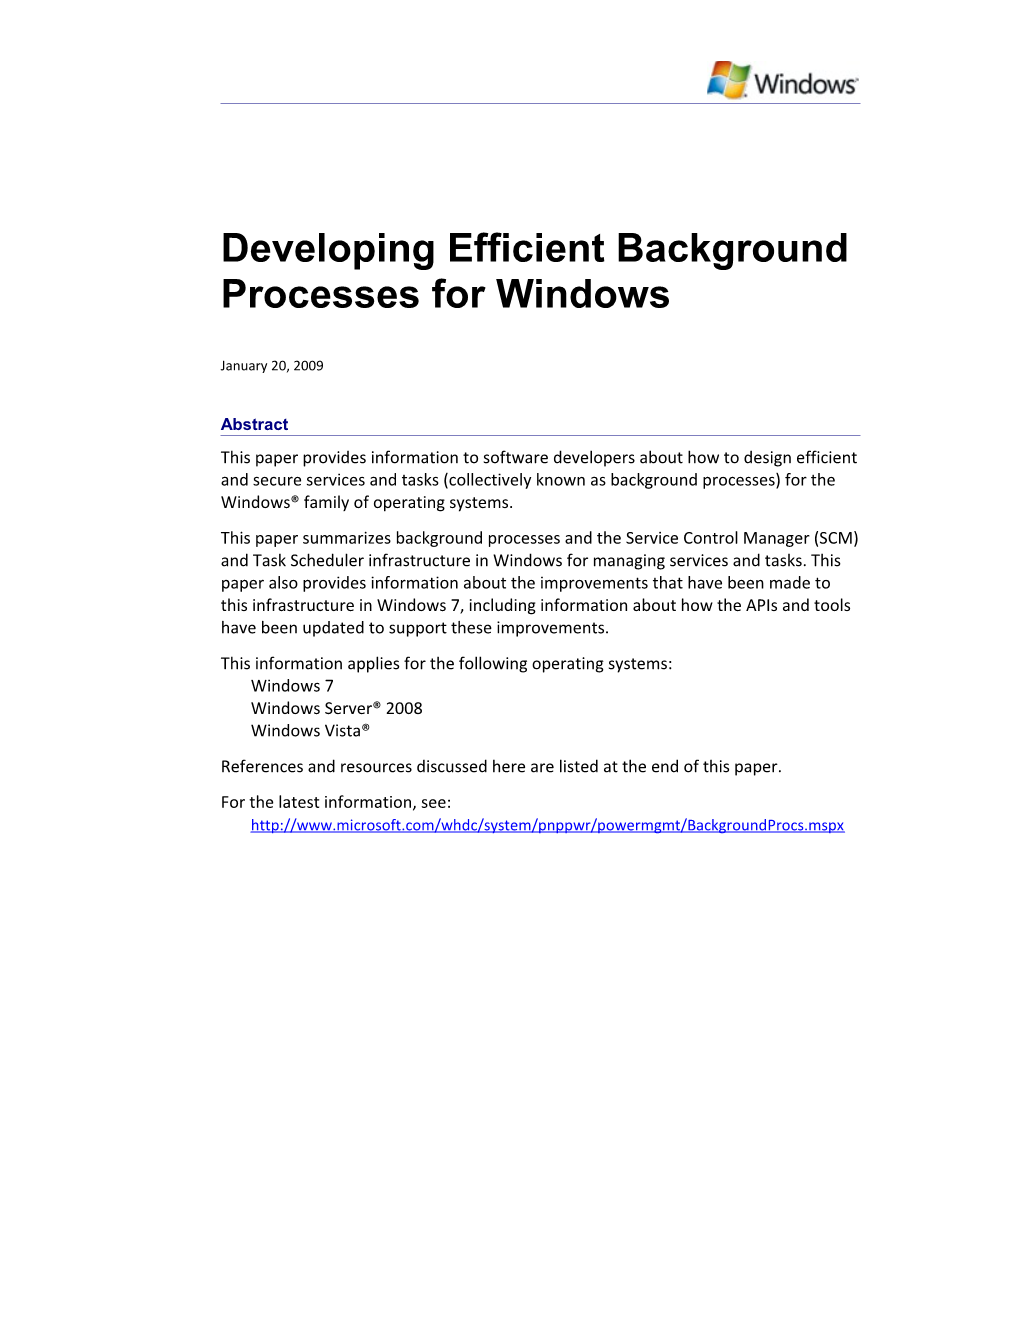 Developing Efficient Background Processes for Windows